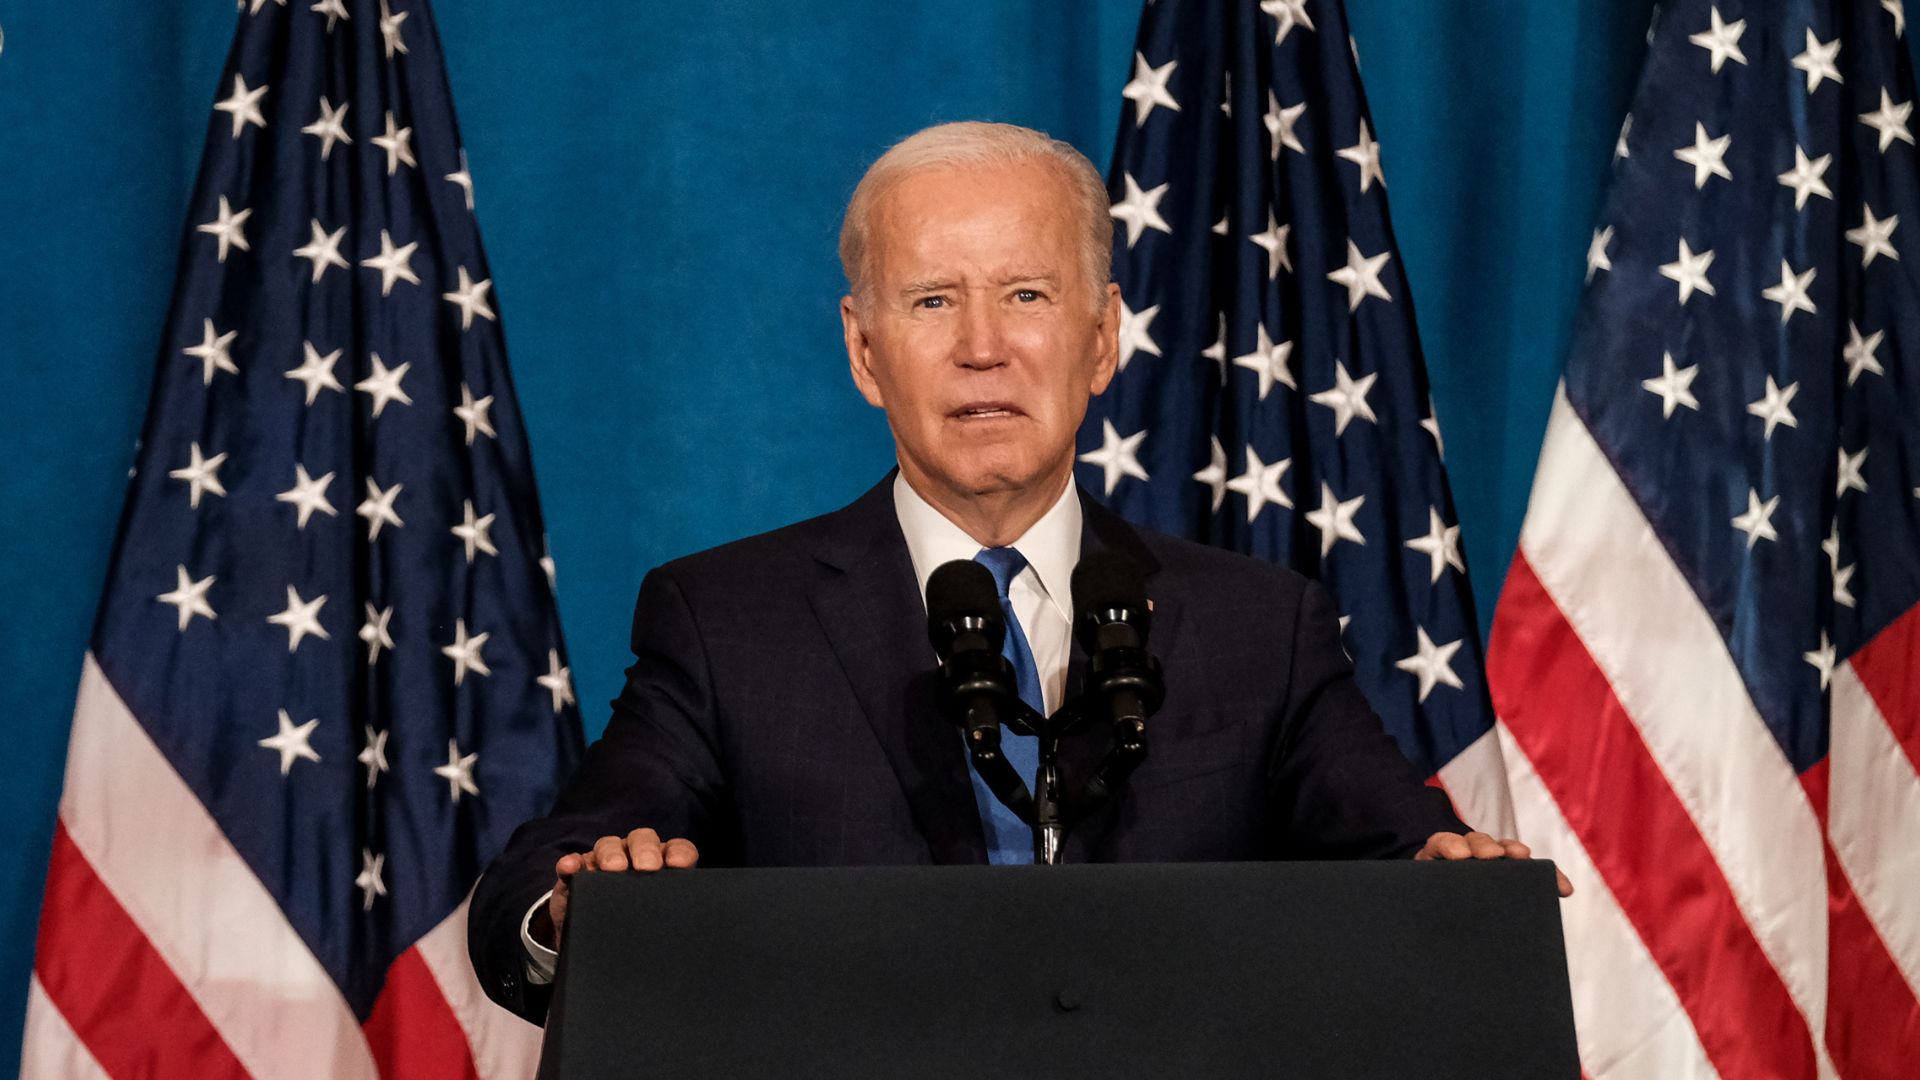 republican-nh-gov:-biden-being-used-as-a-‘tool’-to-push-attacks-on-half-of-america